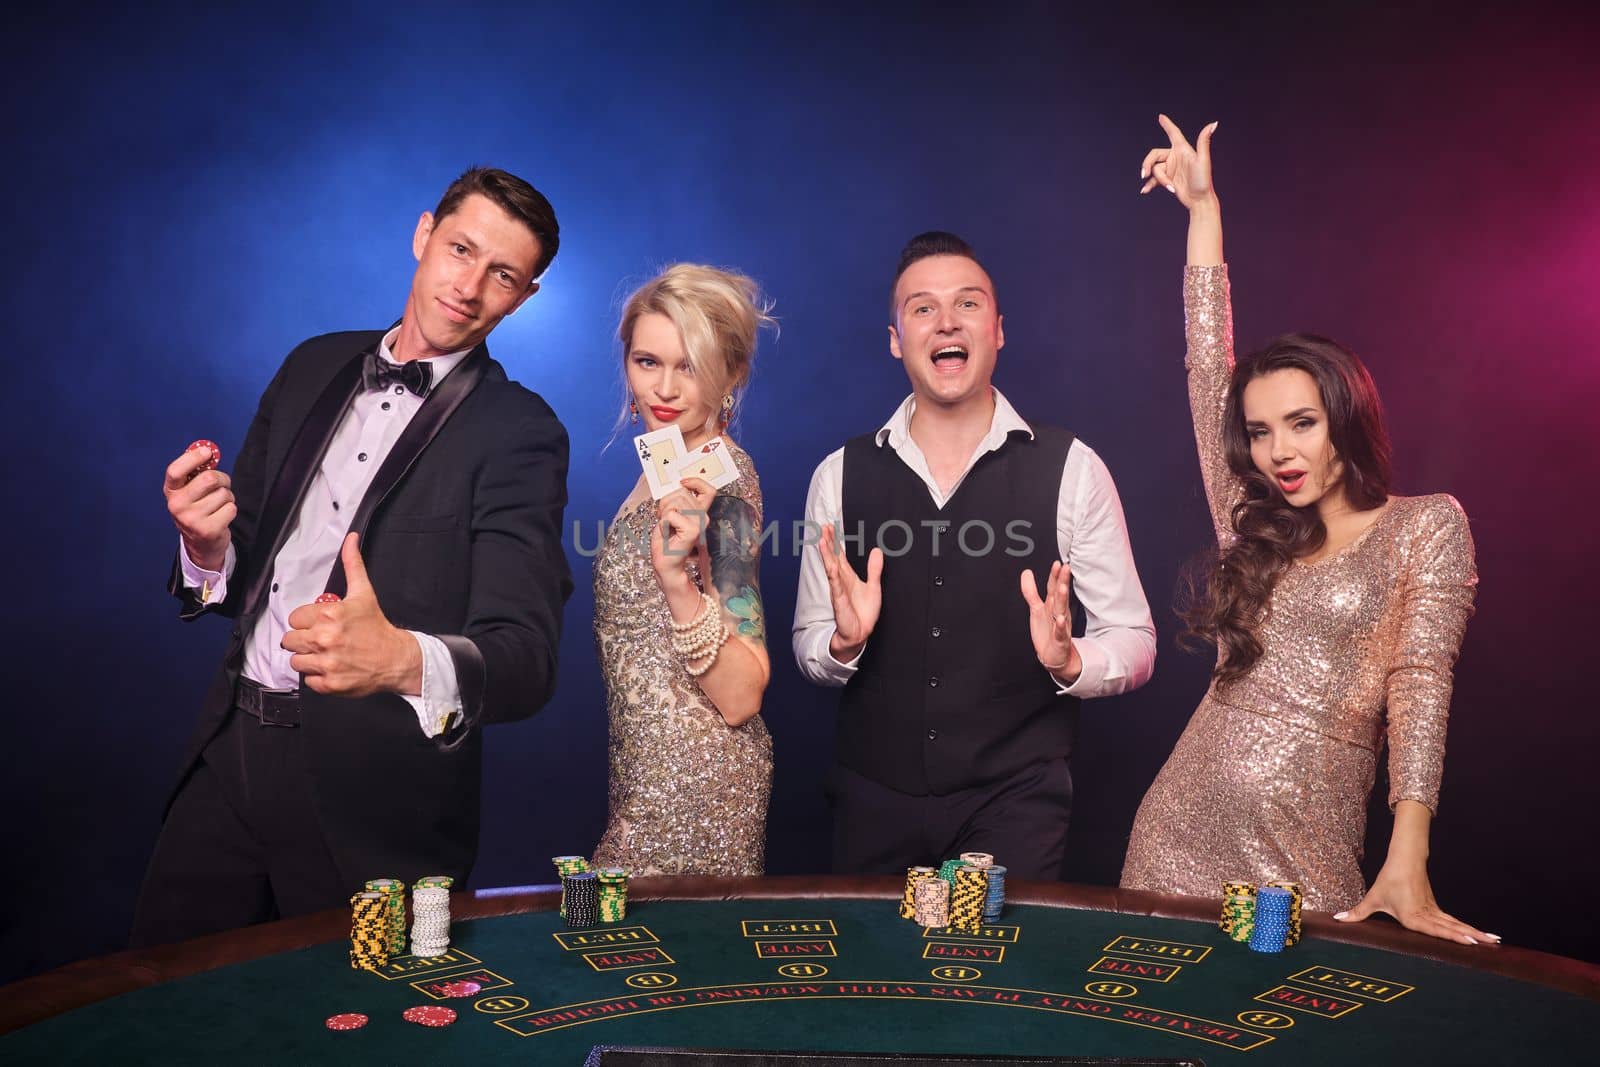 Group of a stylish rich colleagues are playing poker at casino. Youth are making bets waiting for a big win. They are looking excited standing at the table against a red and blue backlights on black background. Risky gambling entertainment.